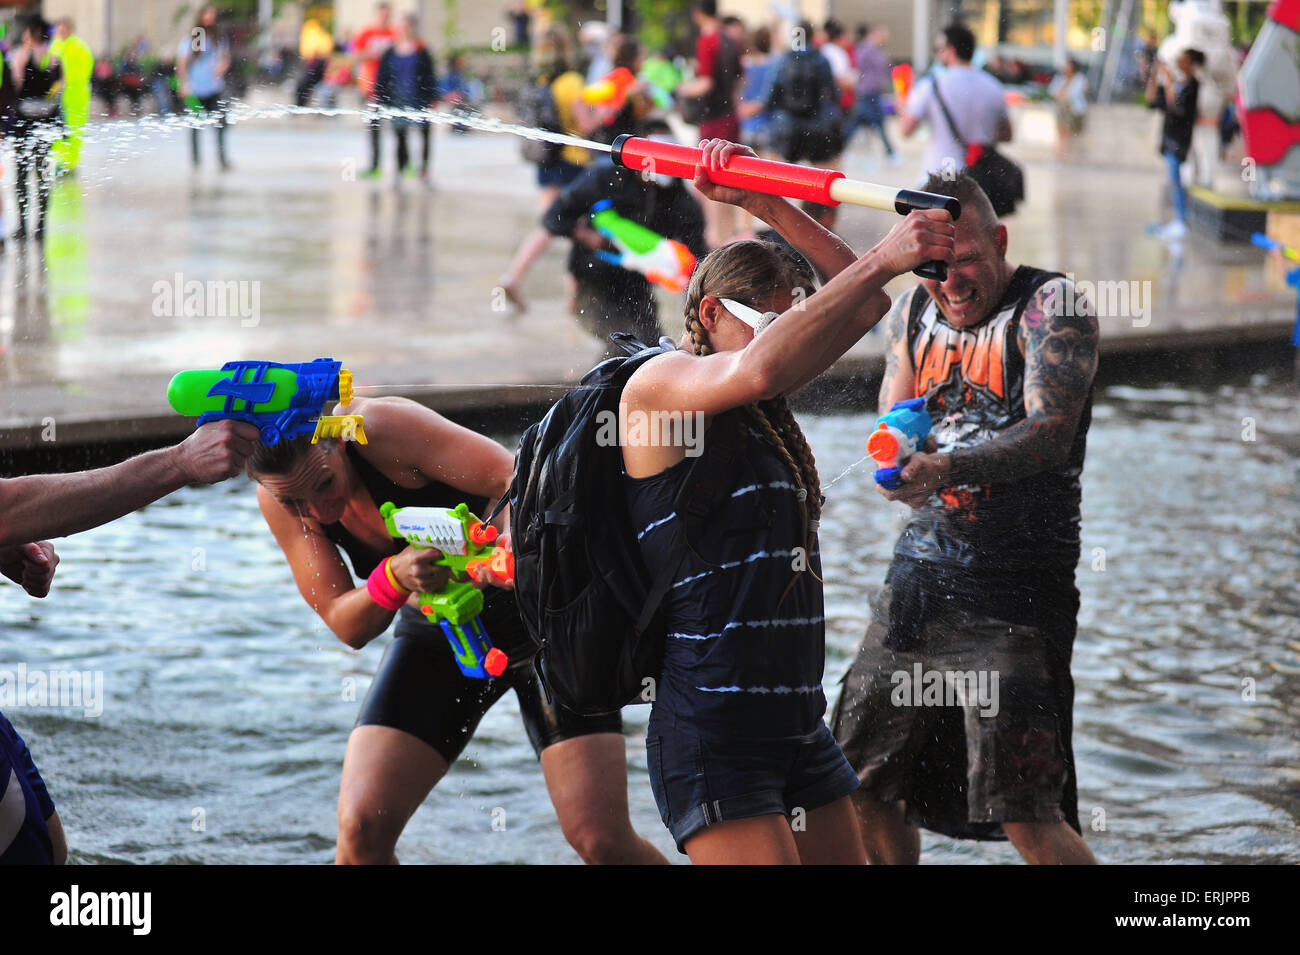 Bristol, UK. 3rd June 2015 In the centre of Bristol as temperatures reach 18 degrees Celsius hundreds gather for a giant water fight. Using water pistols and balloons people cooled themselves off from the evening sun and celebrated the recent warmer weather at an event organized by the Bristol Smile Instigation Collective. Credit:  Jonny White/Alamy Live News Stock Photo